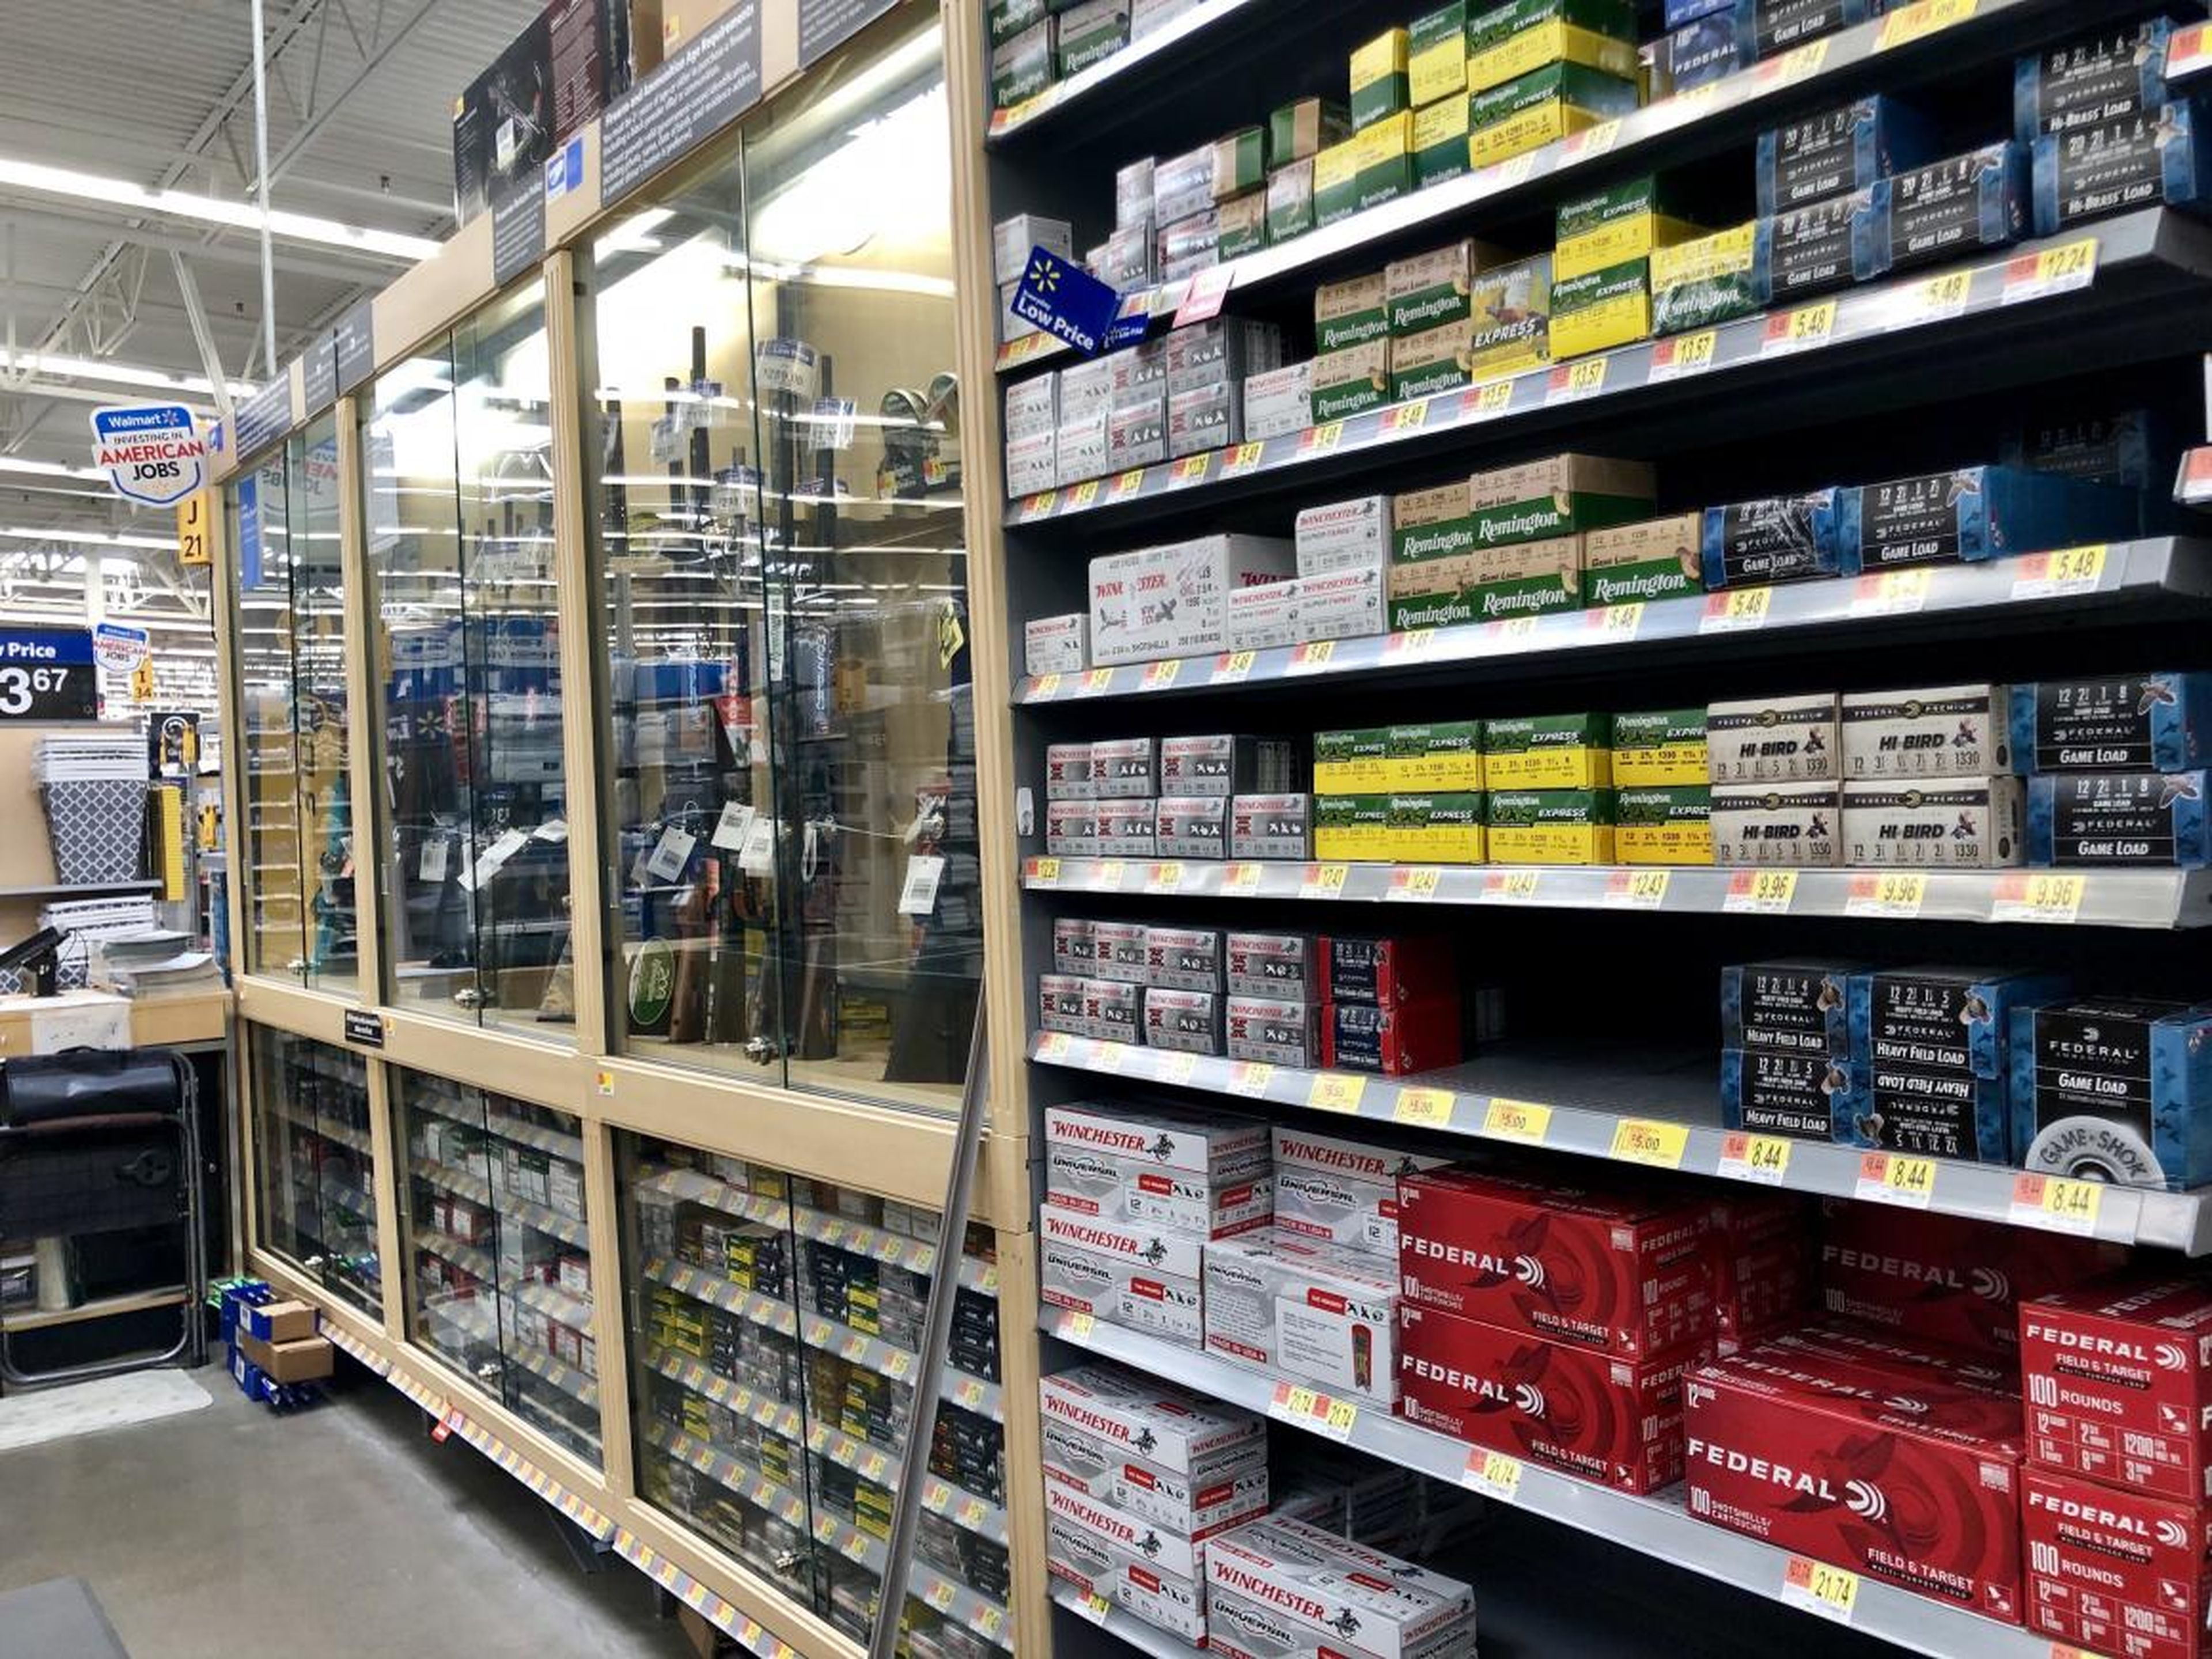 I also browsed the shelves of ammunition. Walmart said recently that it accounted for about 2% of all gun sales and 20% of ammunition sales in the US.